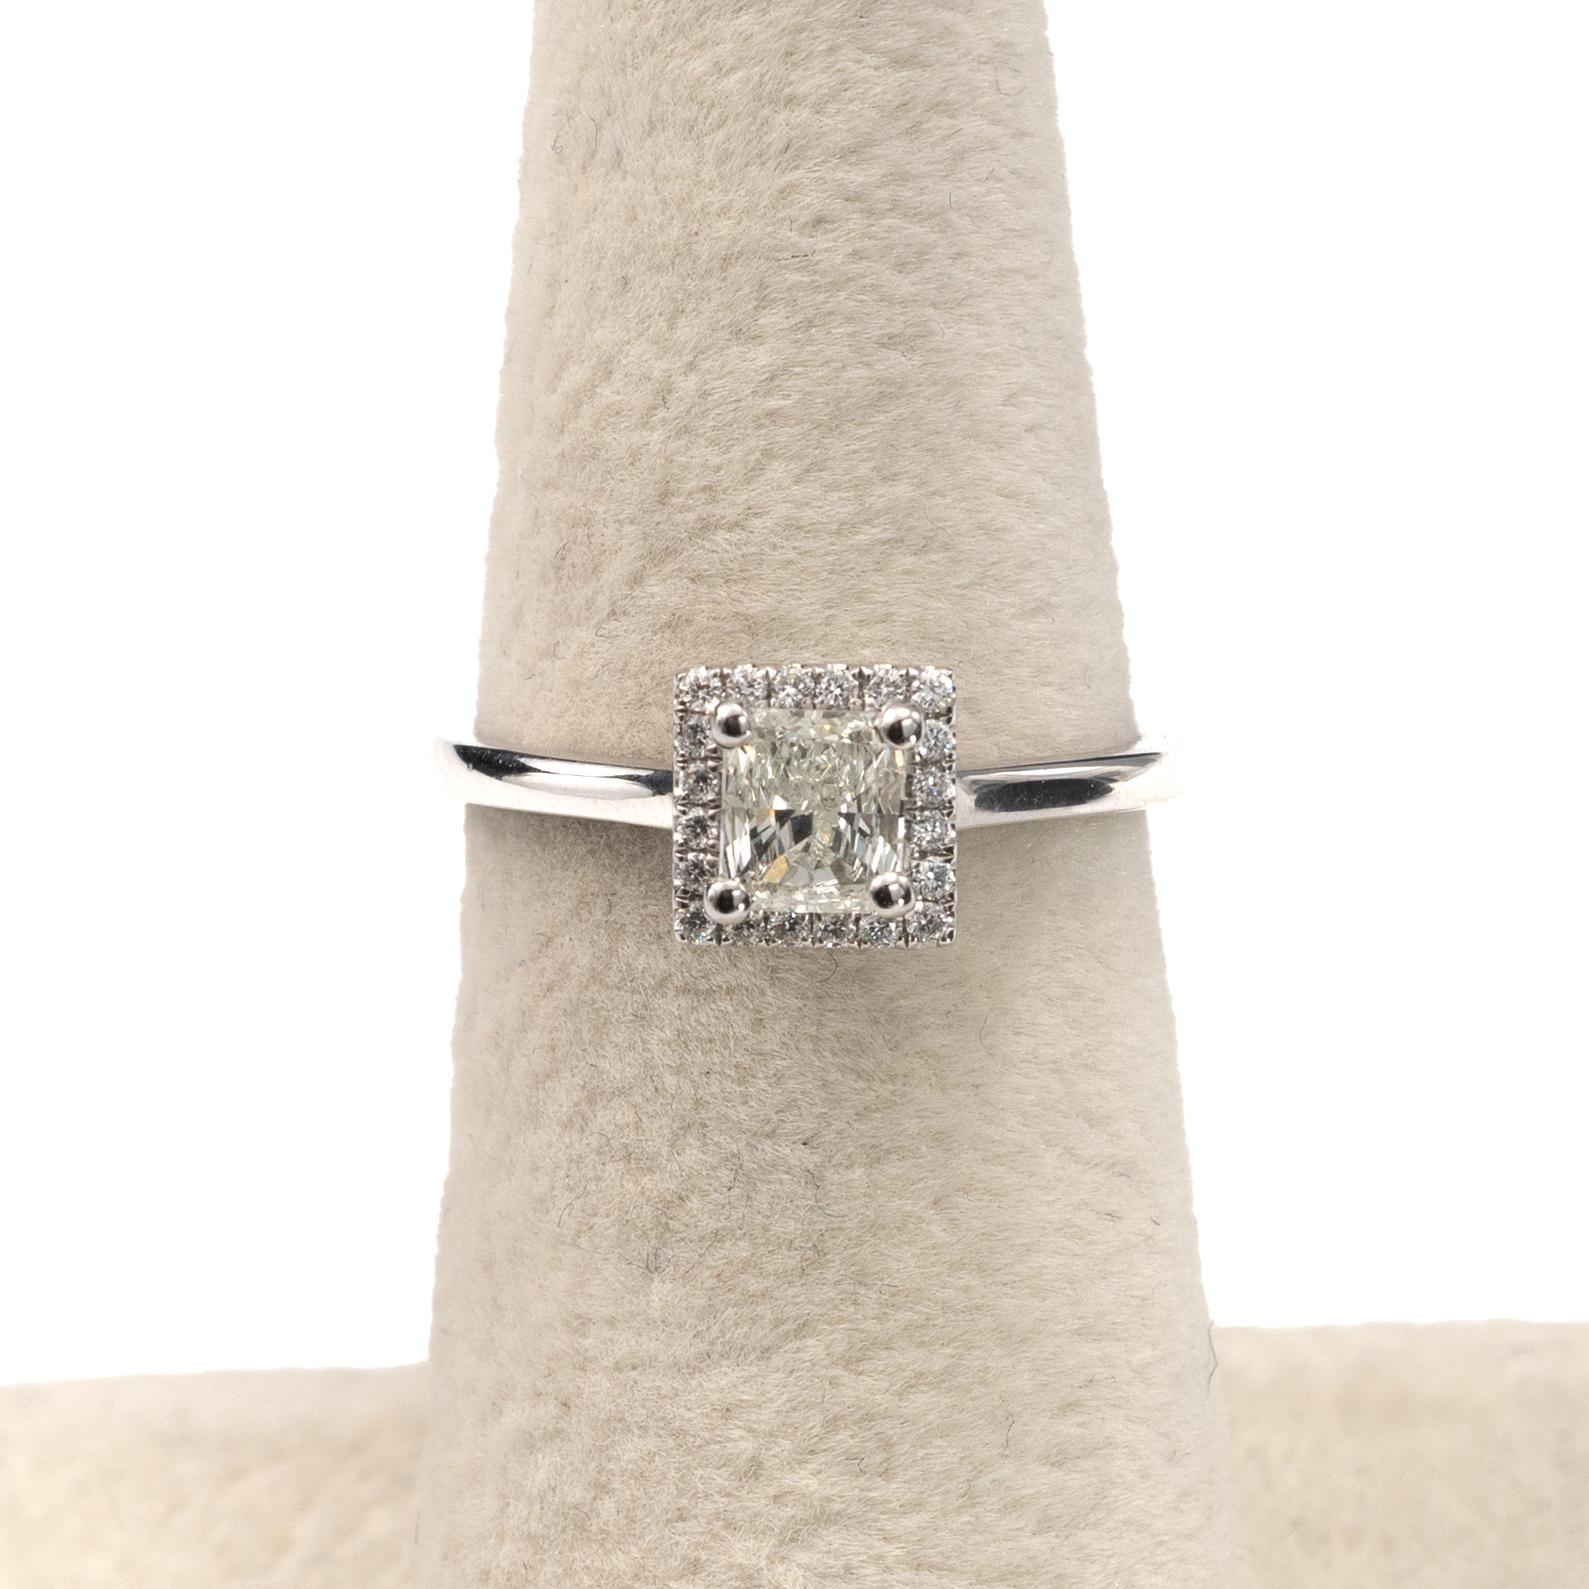 A contemporary square halo diamond engagement ring, featuring a 0.65 Carat radiant cut certified diamond.

Crafted in 18 karat white gold by our expert artisans partners in the UK, the contemporary ring is fully hallmarked and comes with a full